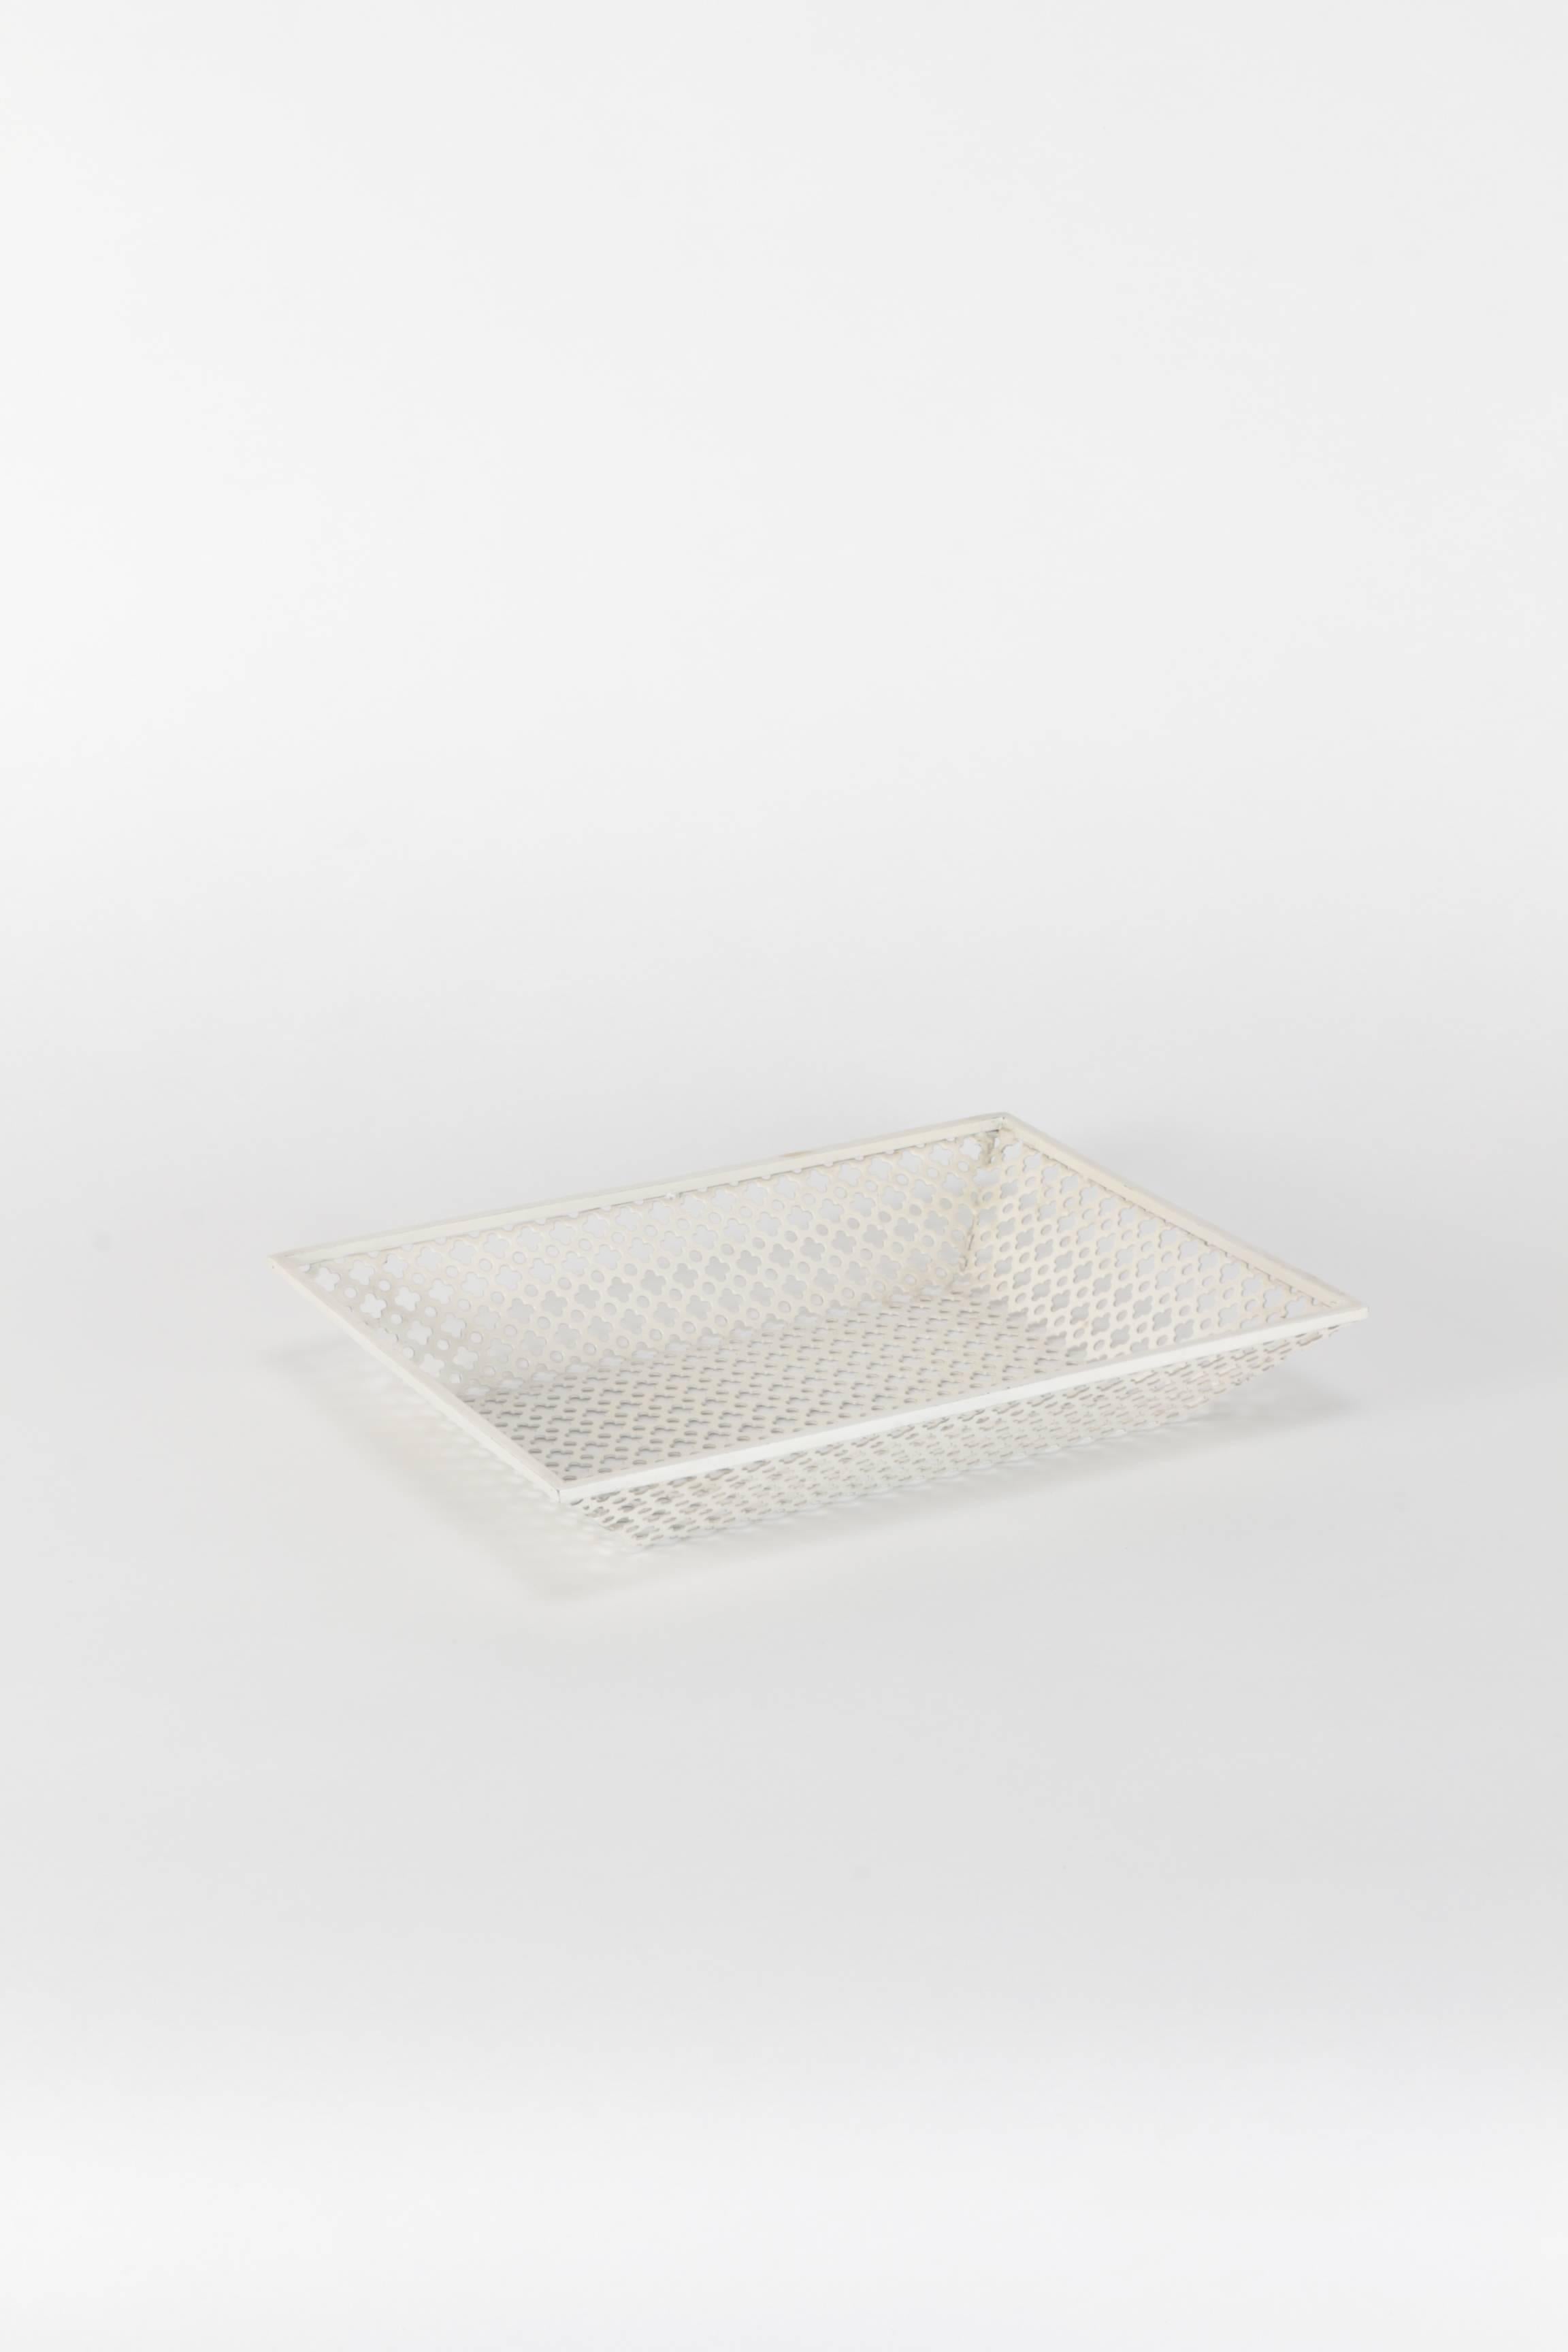 Wonderful and rare perforated metal fruit basket by Mathieu Matégot, manufactured in the Matégot workshop in France in the 1950s.